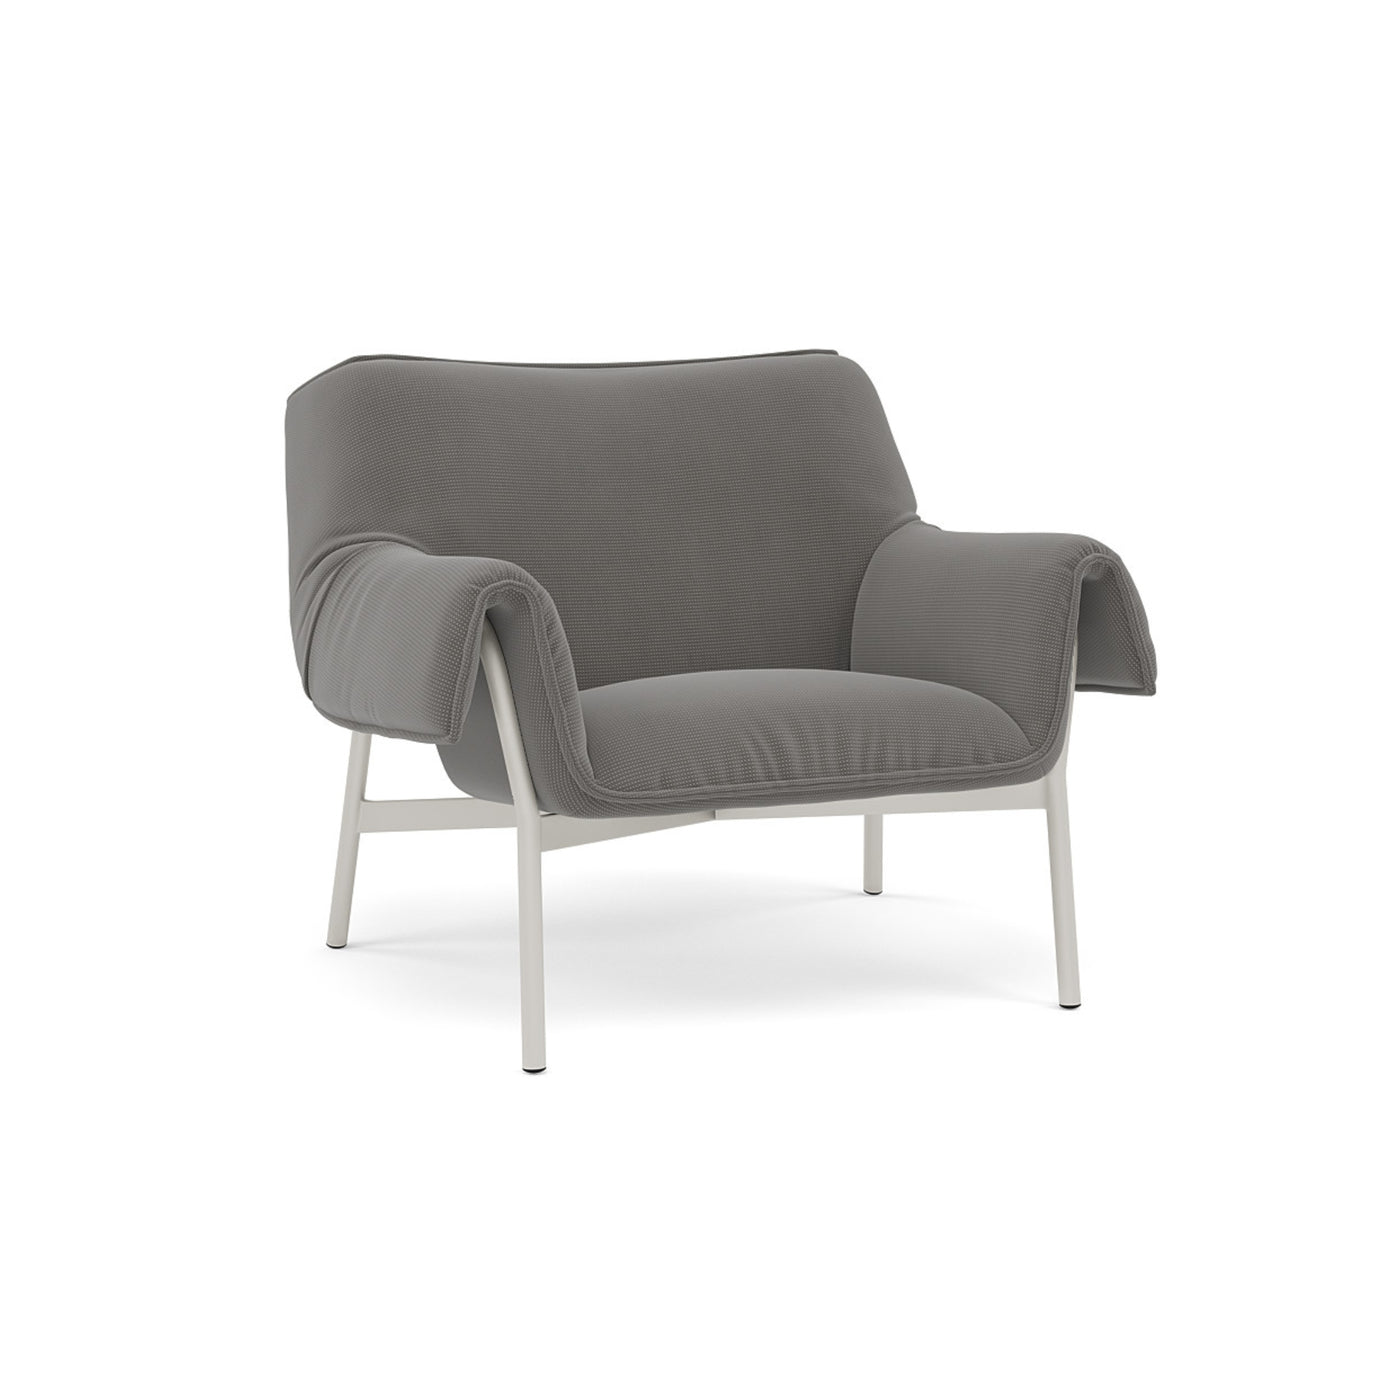 Muuto Wrap Lounge Chair. Made to order from someday designs. #colour_sabi-151